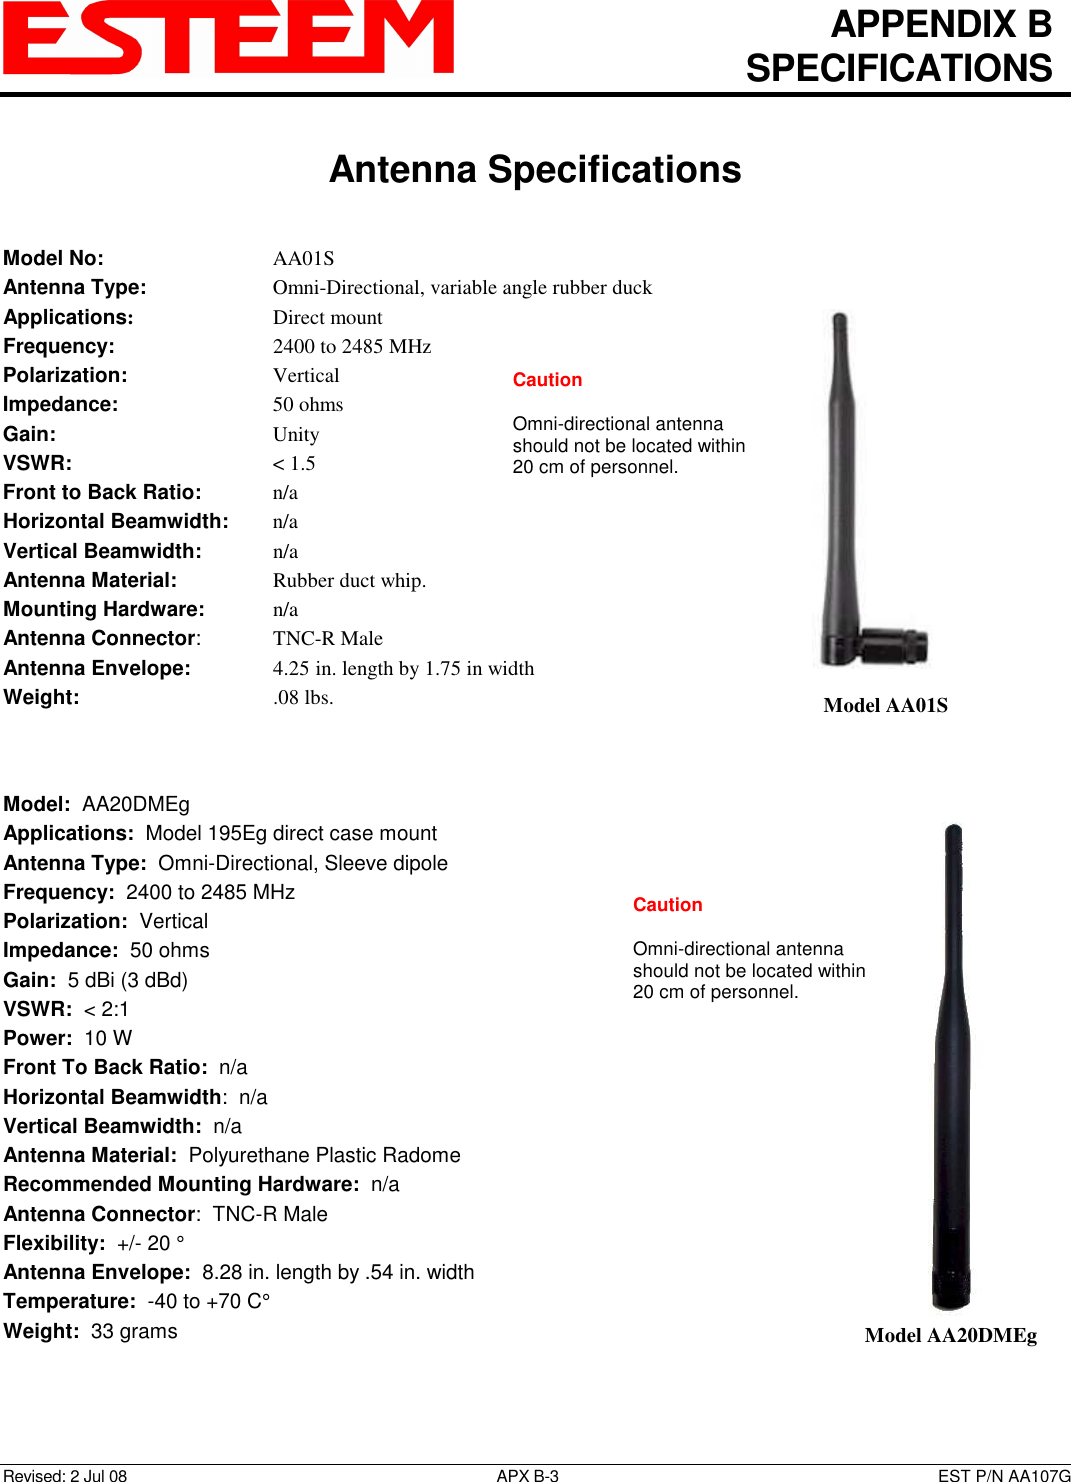   APPENDIX B   SPECIFICATIONS   Antenna Specifications   Revised: 2 Jul 08  APX B-3  EST P/N AA107G Model No:        AA01S Antenna Type:      Omni-Directional, variable angle rubber duck Applications:       Direct mount Frequency:        2400 to 2485 MHz Polarization:        Vertical Impedance:        50 ohms Gain:          Unity VSWR:          &lt; 1.5  Front to Back Ratio:    n/a Horizontal Beamwidth:  n/a Vertical Beamwidth:     n/a Antenna Material:     Rubber duct whip.  Mounting Hardware:    n/a  Antenna Connector:    TNC-R Male Antenna Envelope:    4.25 in. length by 1.75 in width Weight:           .08 lbs.     Model:  AA20DMEg  Applications:  Model 195Eg direct case mount Antenna Type:  Omni-Directional, Sleeve dipole Frequency:  2400 to 2485 MHz Polarization:  Vertical Impedance:  50 ohms Gain:  5 dBi (3 dBd) VSWR:  &lt; 2:1  Power:  10 W  Front To Back Ratio:  n/a Horizontal Beamwidth:  n/a Vertical Beamwidth:  n/a Antenna Material:  Polyurethane Plastic Radome  Recommended Mounting Hardware:  n/a Antenna Connector:  TNC-R Male  Flexibility:  +/- 20 °  Antenna Envelope:  8.28 in. length by .54 in. width Temperature:  -40 to +70 C°  Weight:  33 grams    Model AA01S  Model AA20DMEg Caution  Omni-directional antenna should not be located within 20 cm of personnel.  Caution  Omni-directional antenna should not be located within 20 cm of personnel.  